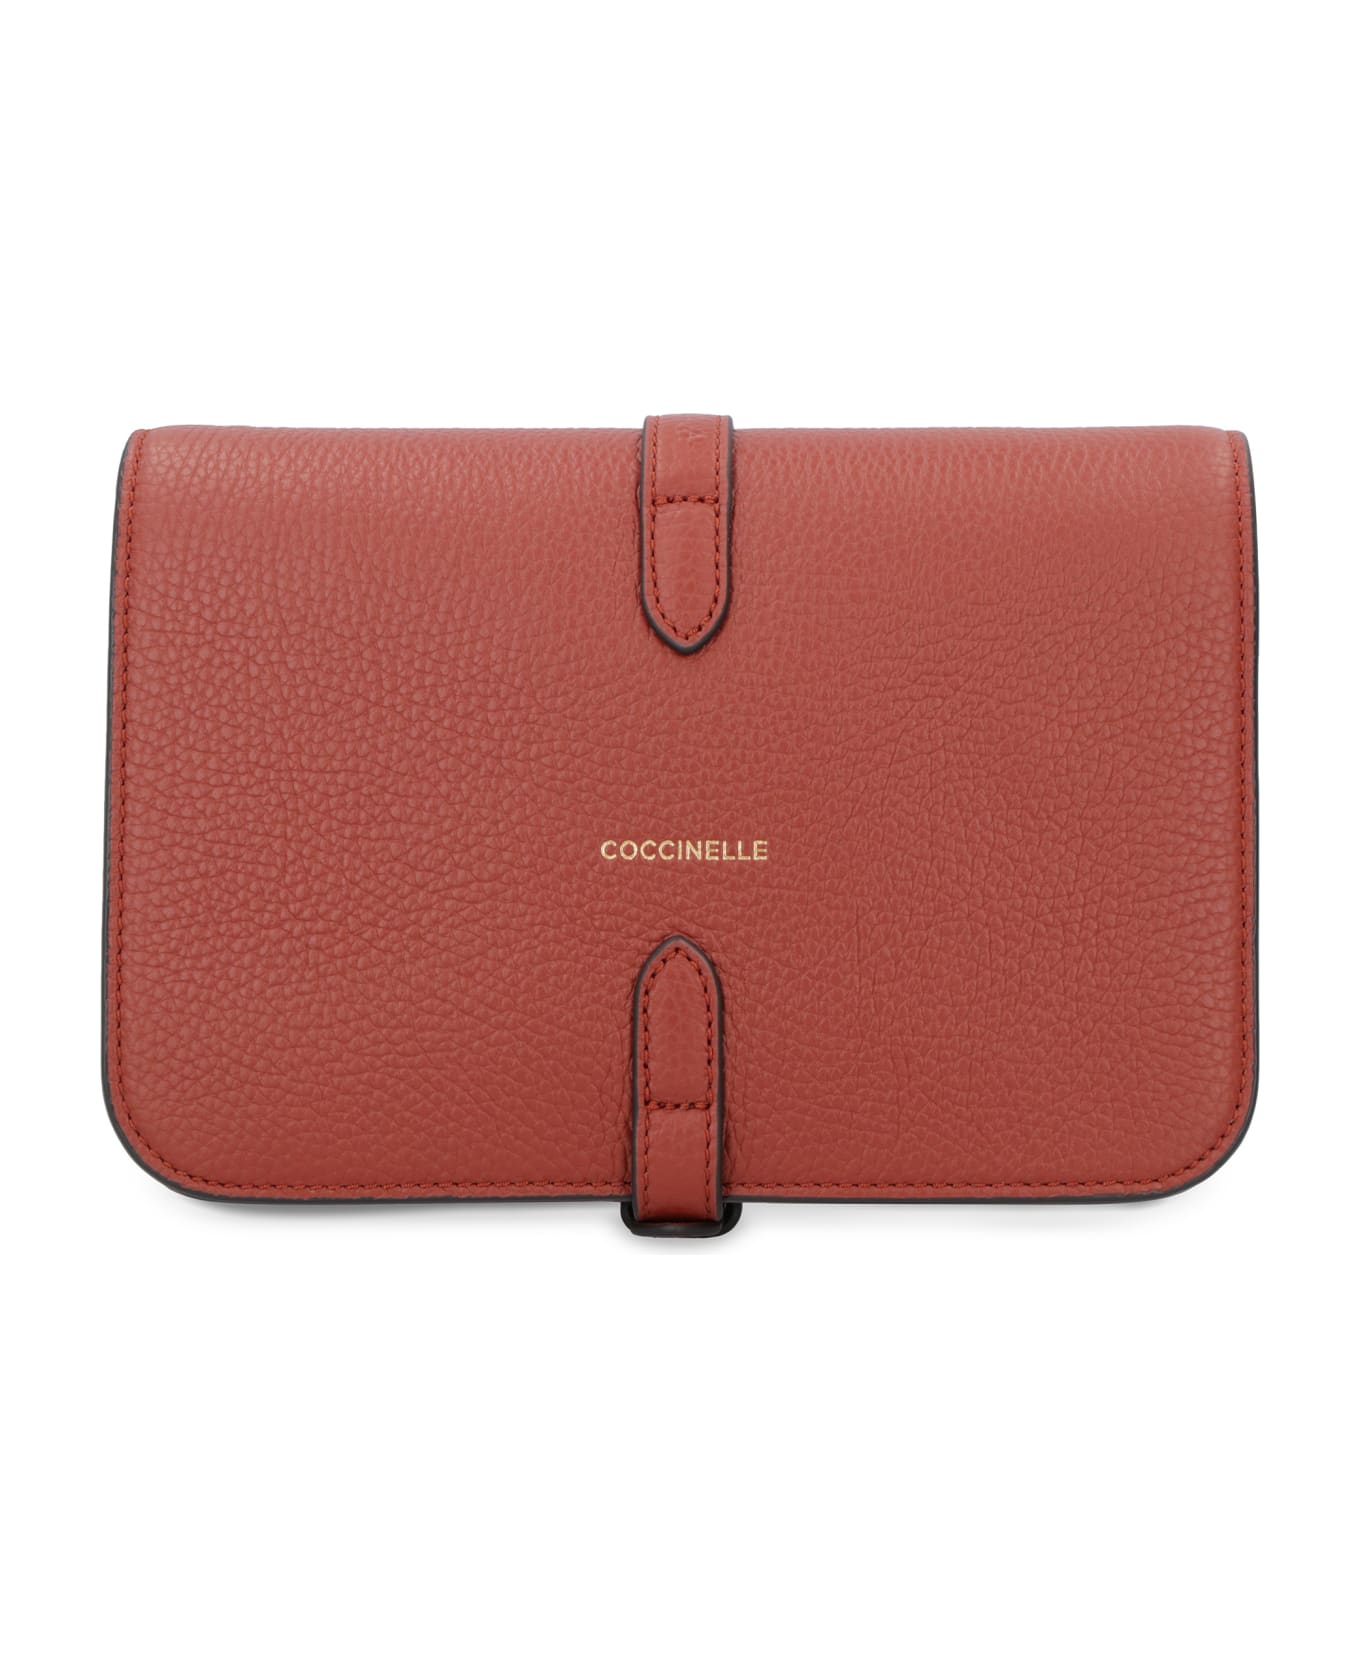 Coccinelle Cosima Leather Crossbody Bag - red